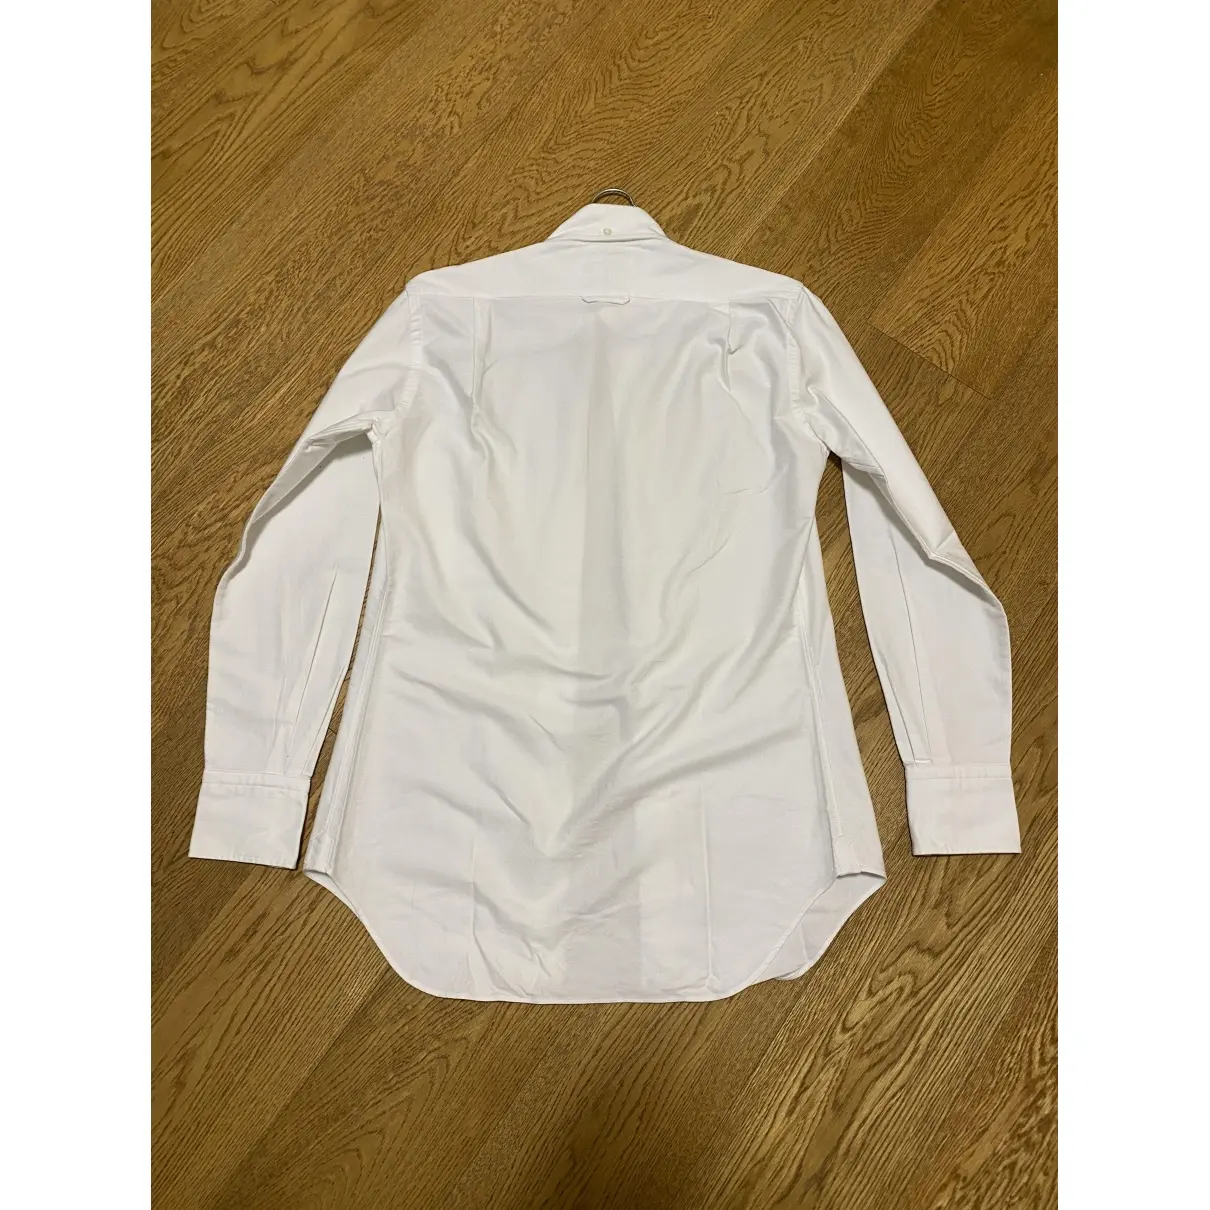 Thom Browne Shirt for sale